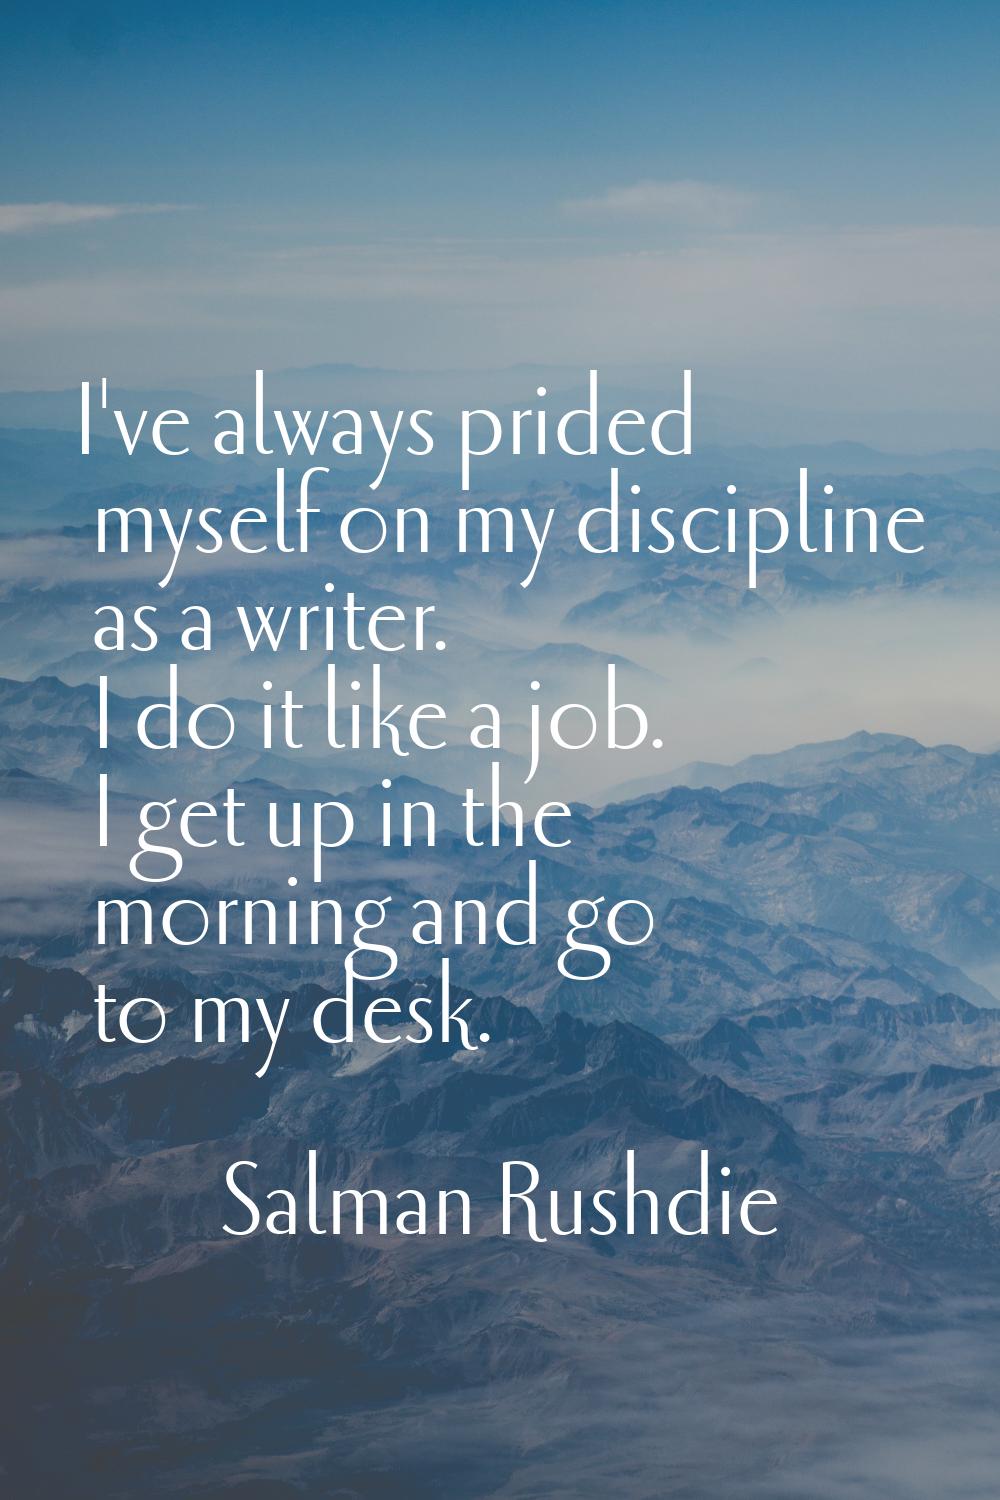 I've always prided myself on my discipline as a writer. I do it like a job. I get up in the morning